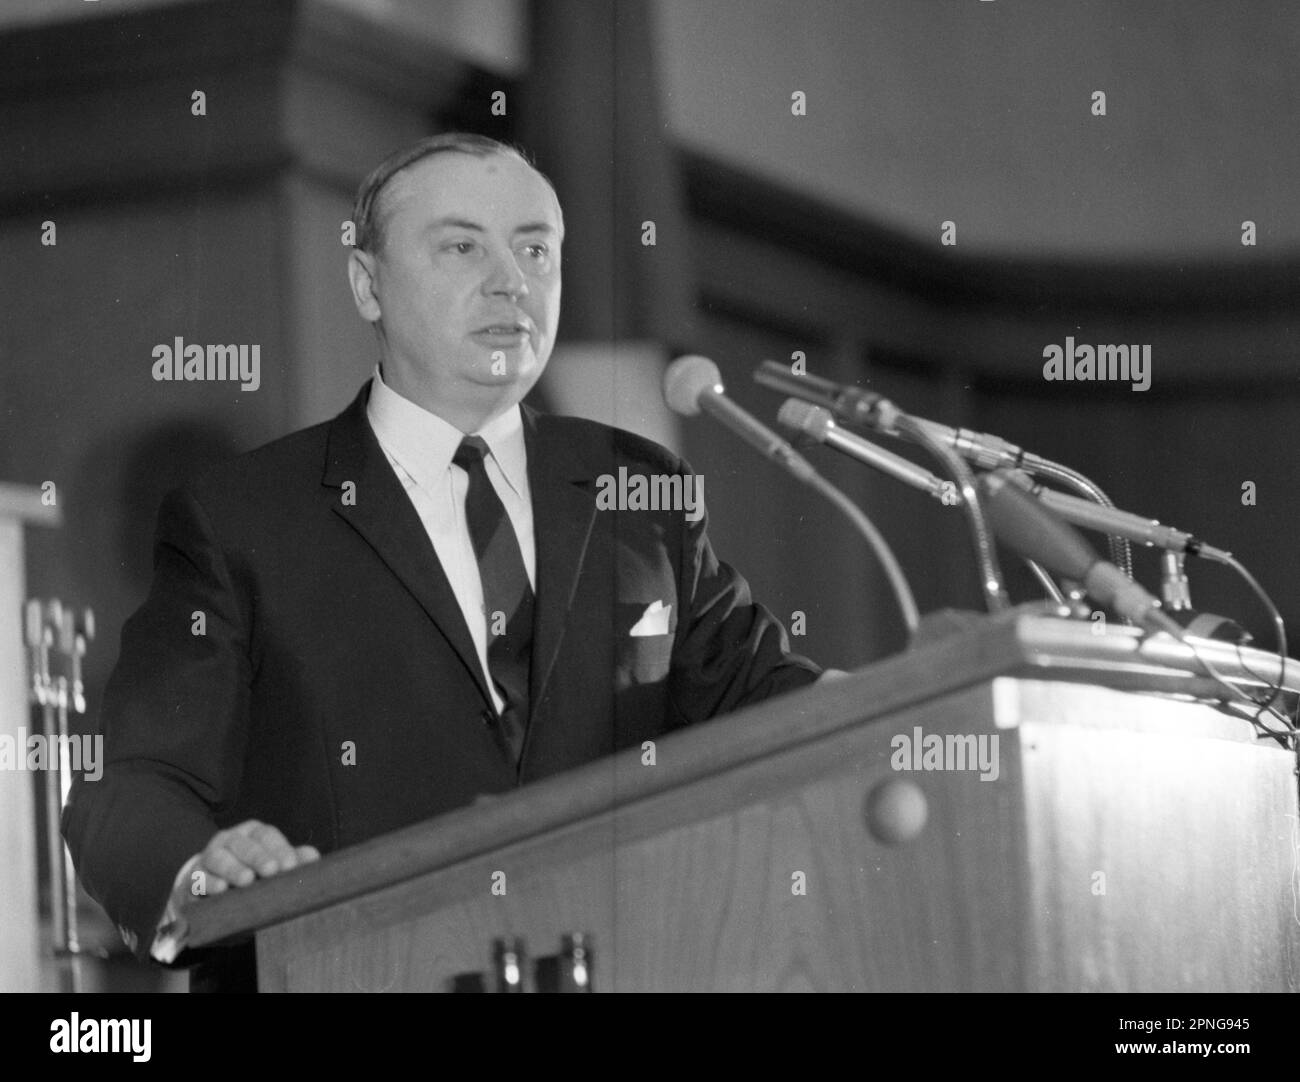 Personalities from politics, business and culture from the years 1965-71. Wilhelm Lenz (CDU-North Rhine-Westphalia) d. 2015, DEU, Germany Stock Photo